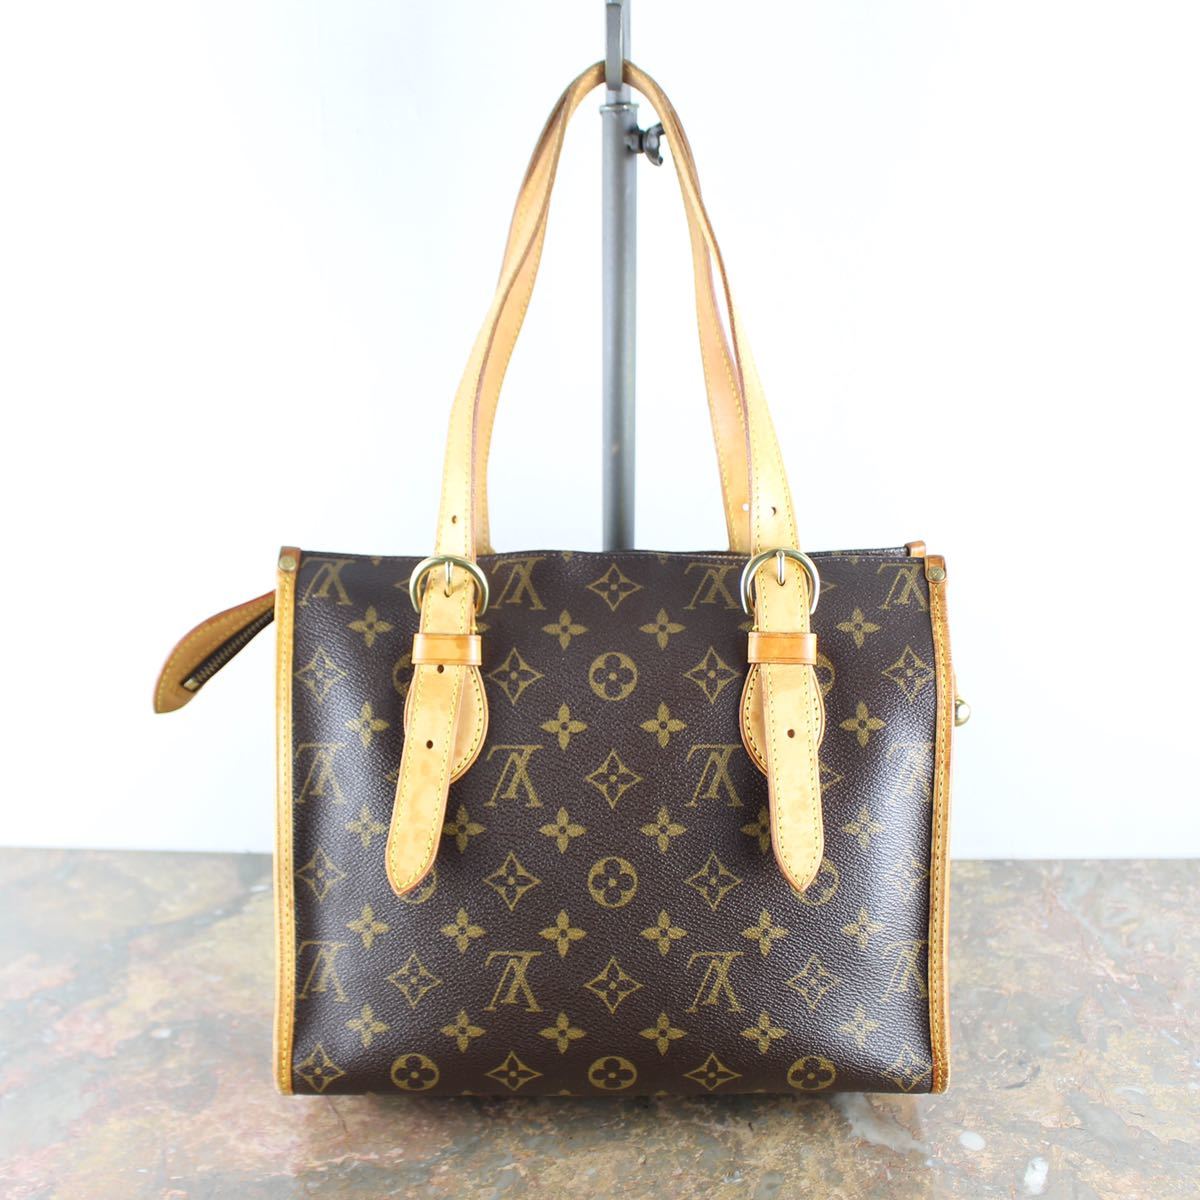 LOUIS VUITTON M40007 FL0045 MONOGRAM PATTERNED TOTE BAG MADE IN FRANCE/ルイヴィトンポパンクールオモノグラム柄トートバッグ